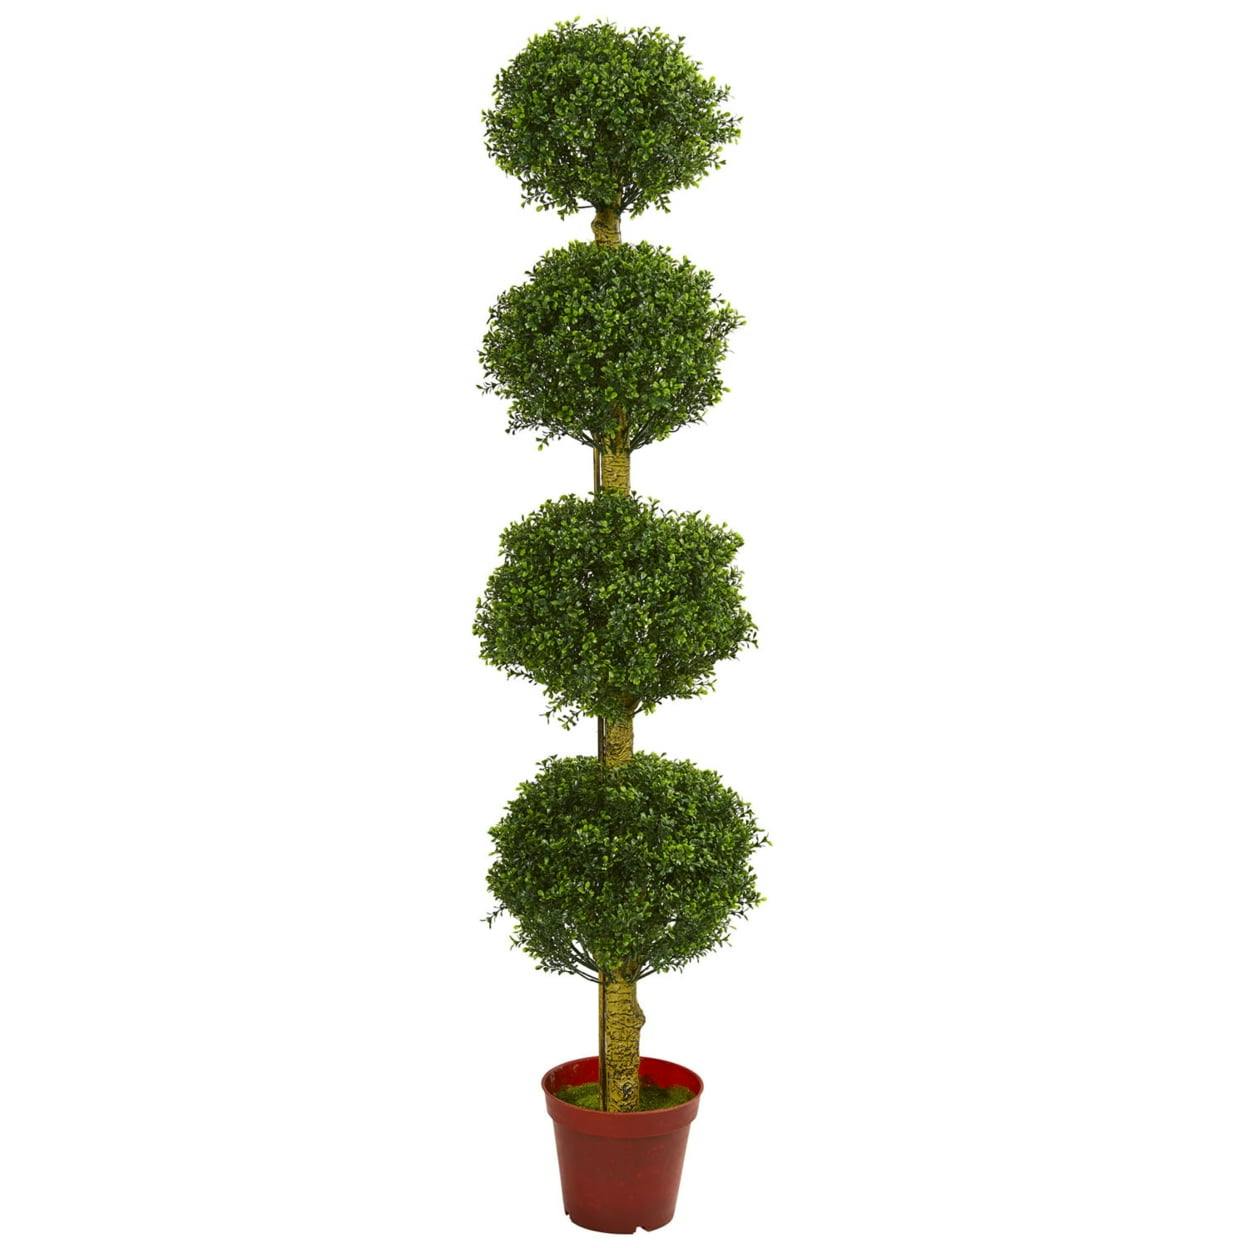 Elegant 6' UV-Resistant Outdoor Boxwood Topiary with Four Tiers